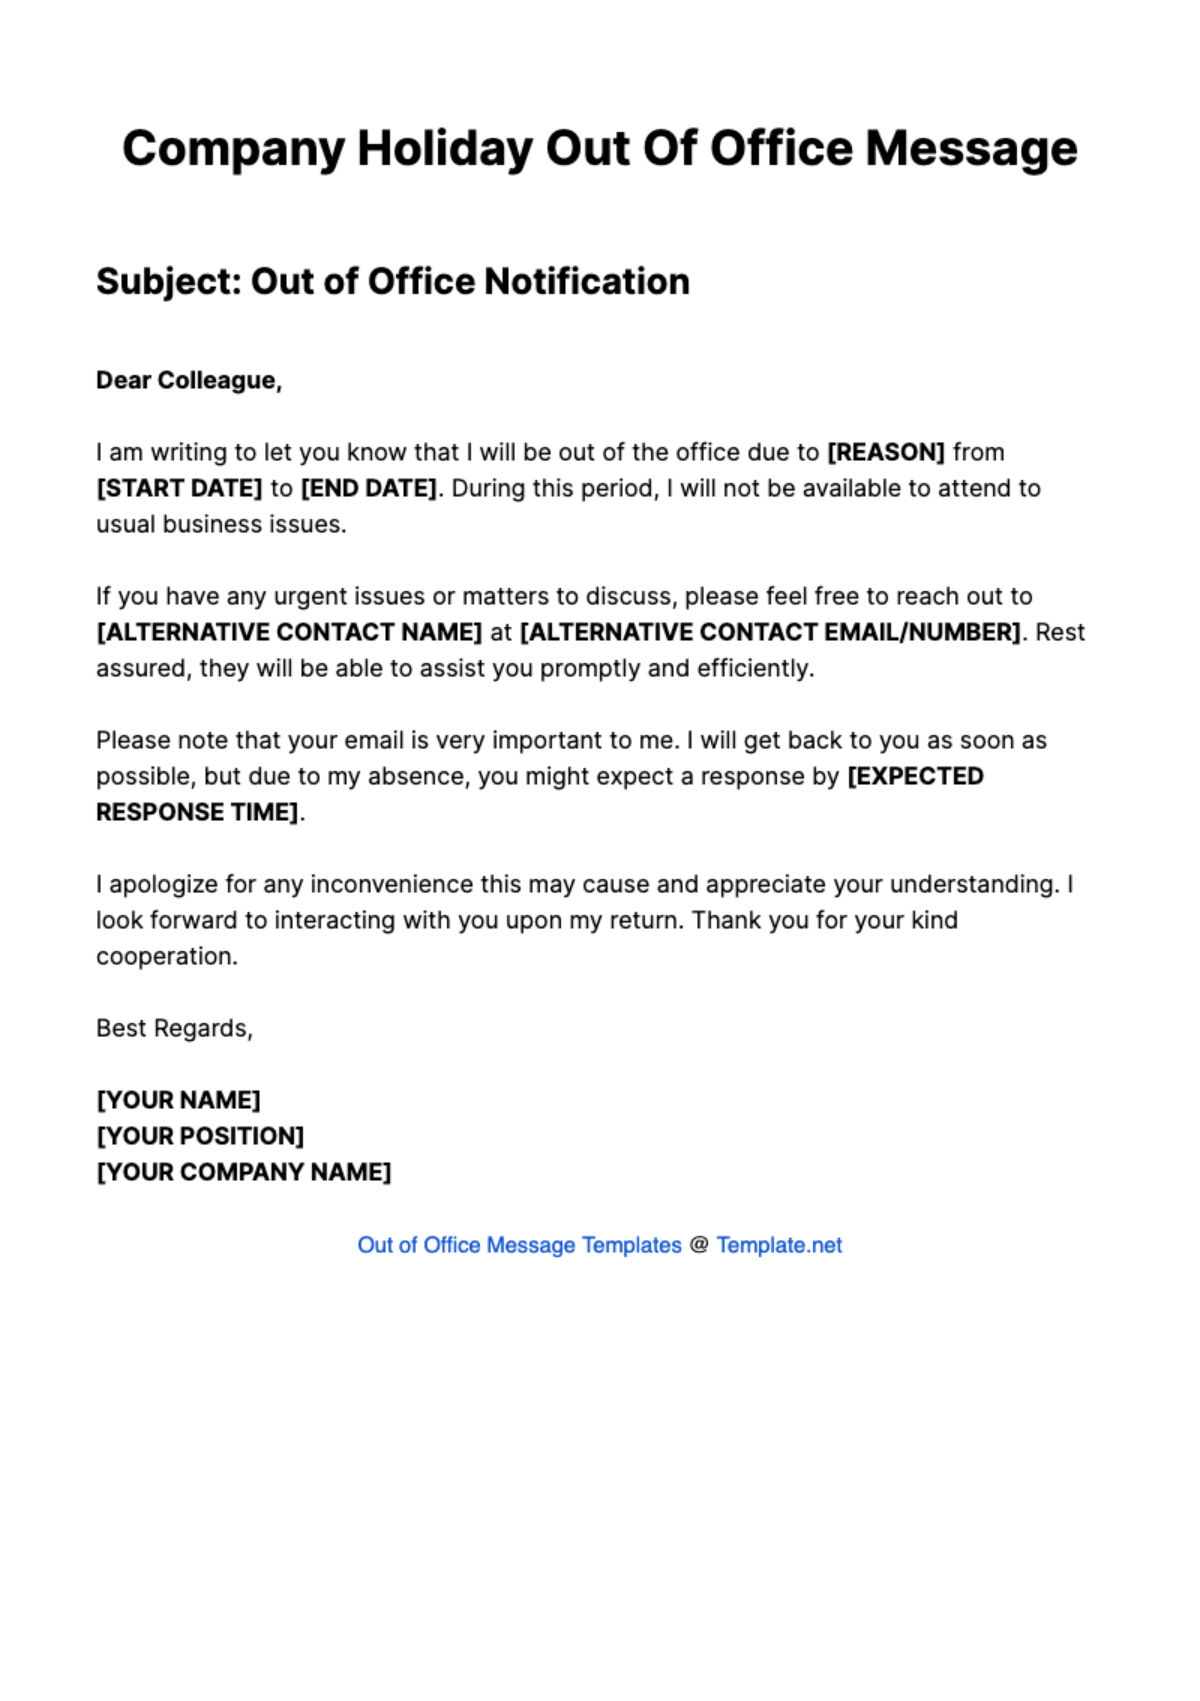 Company Holiday Out Of Office Message Template